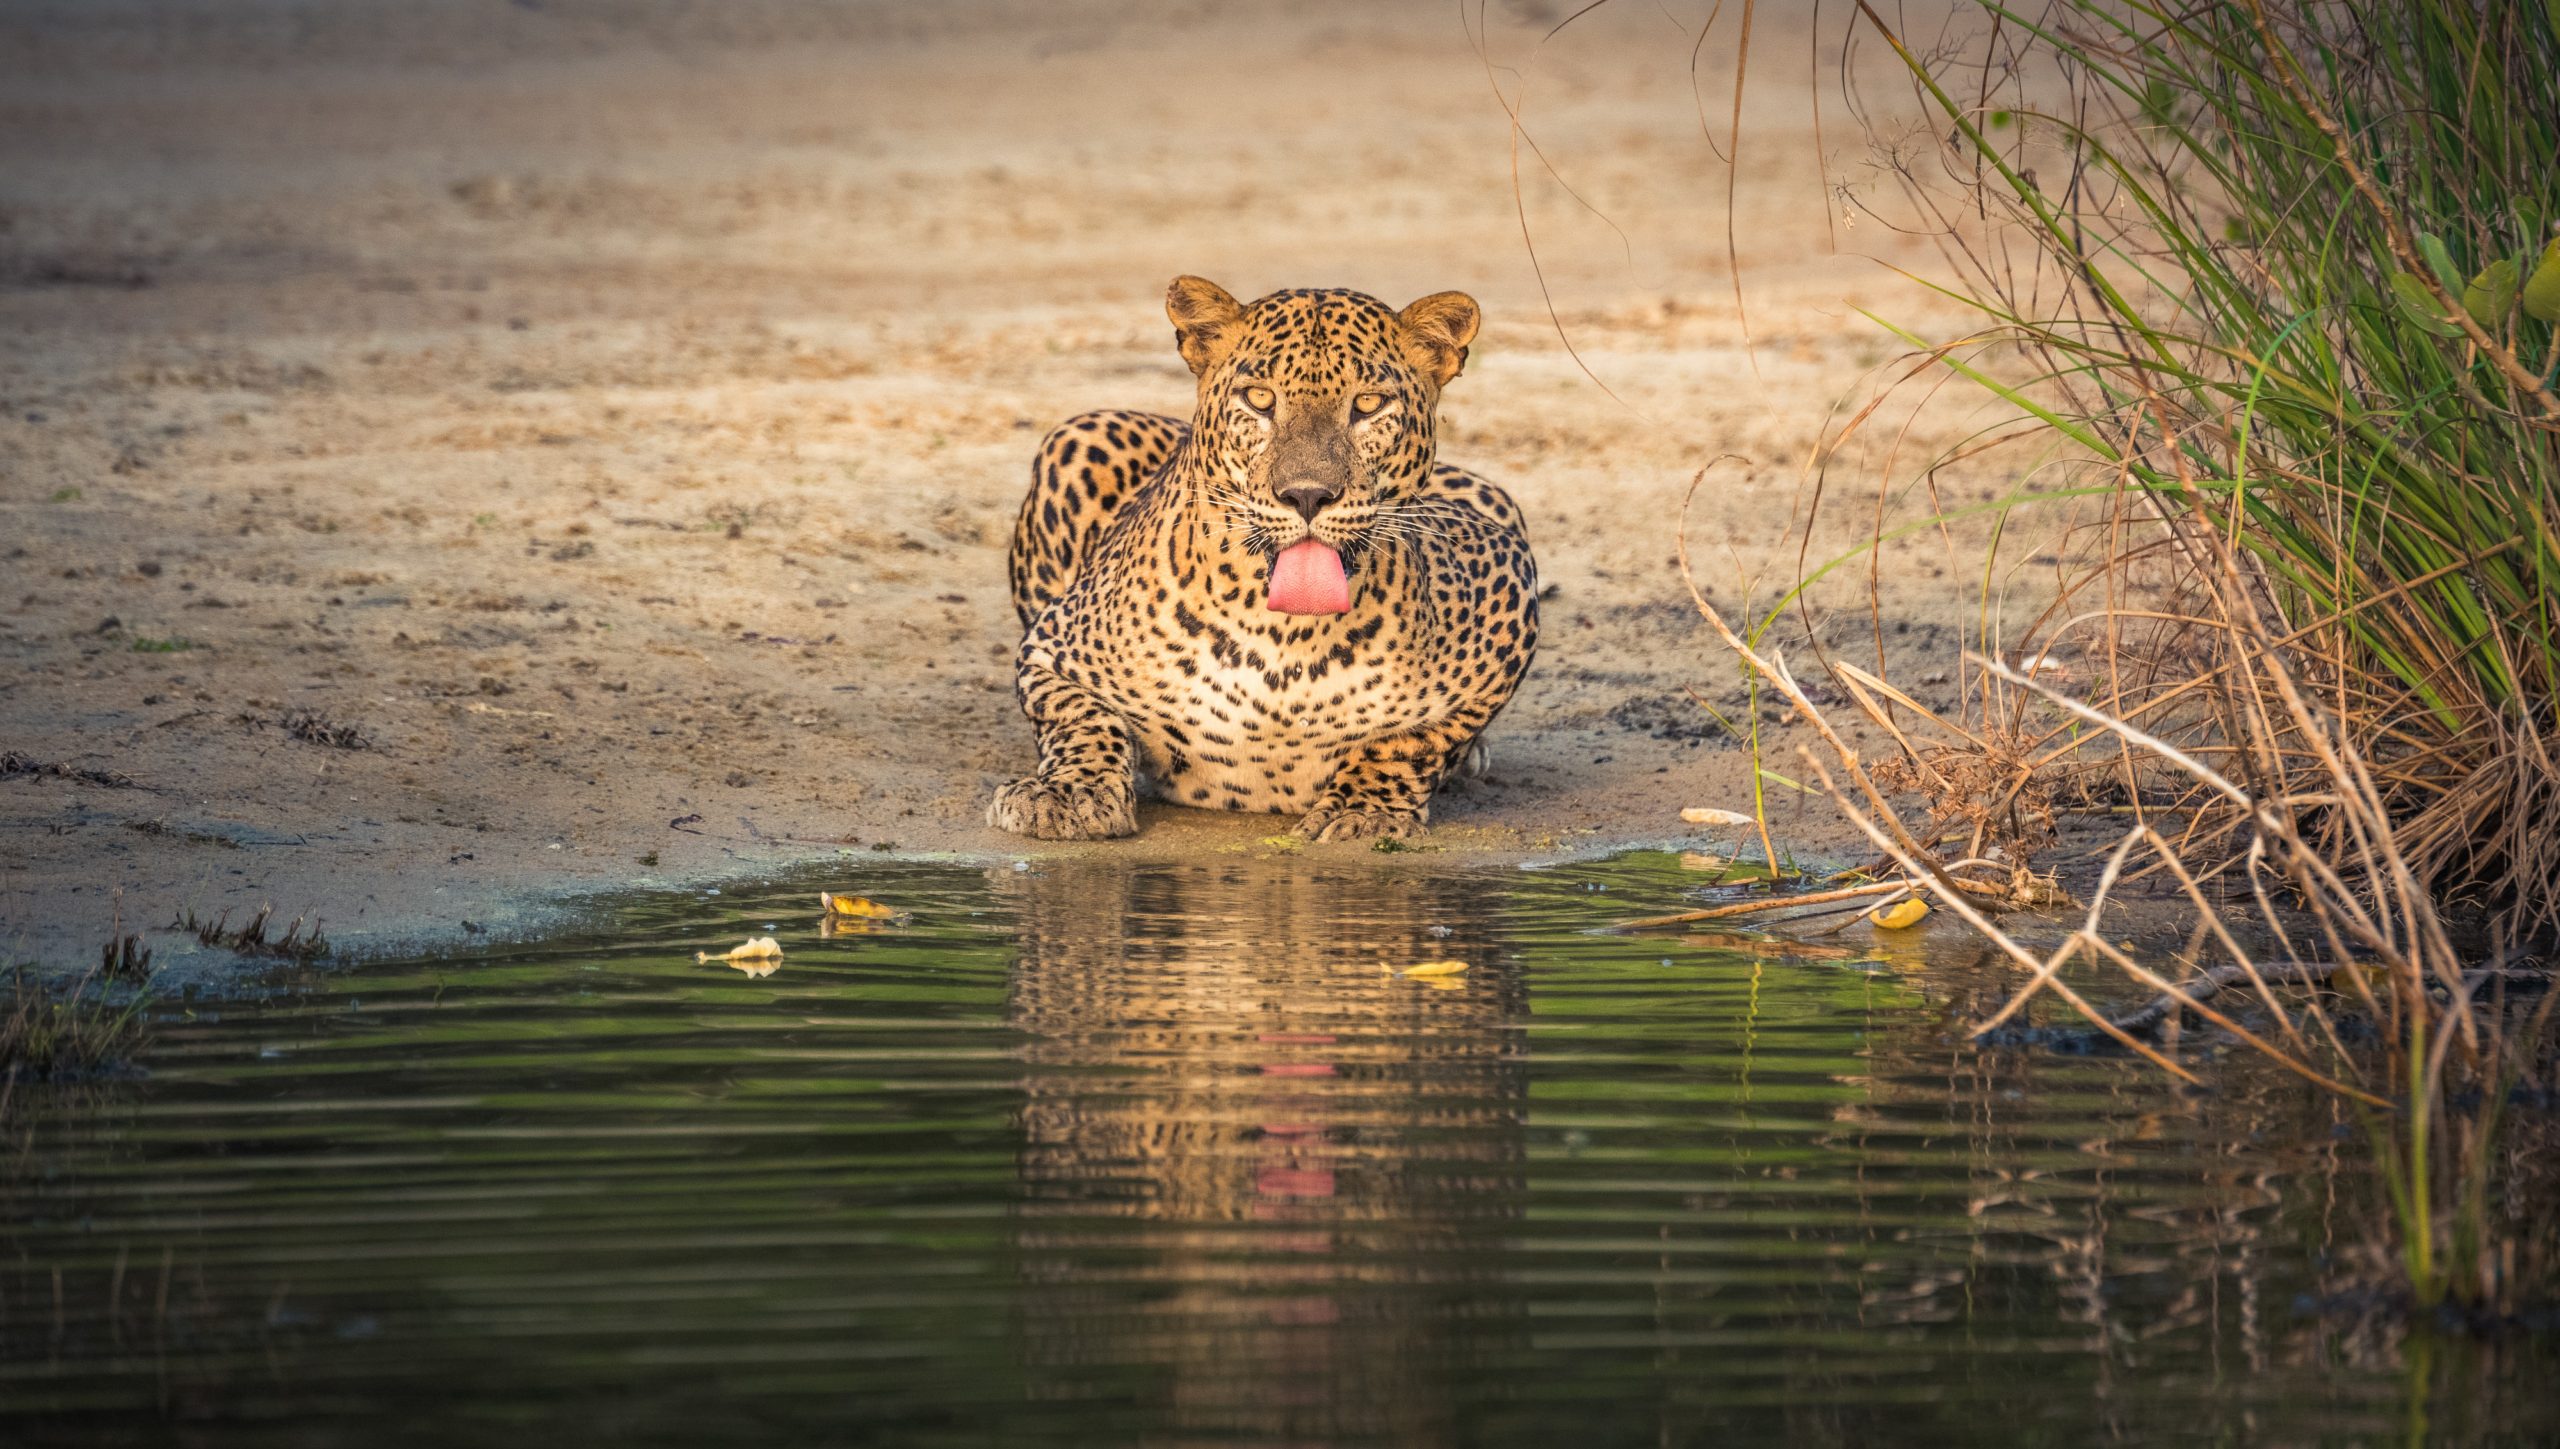 A leopard looks up aware he is being watched drinking from a lake.